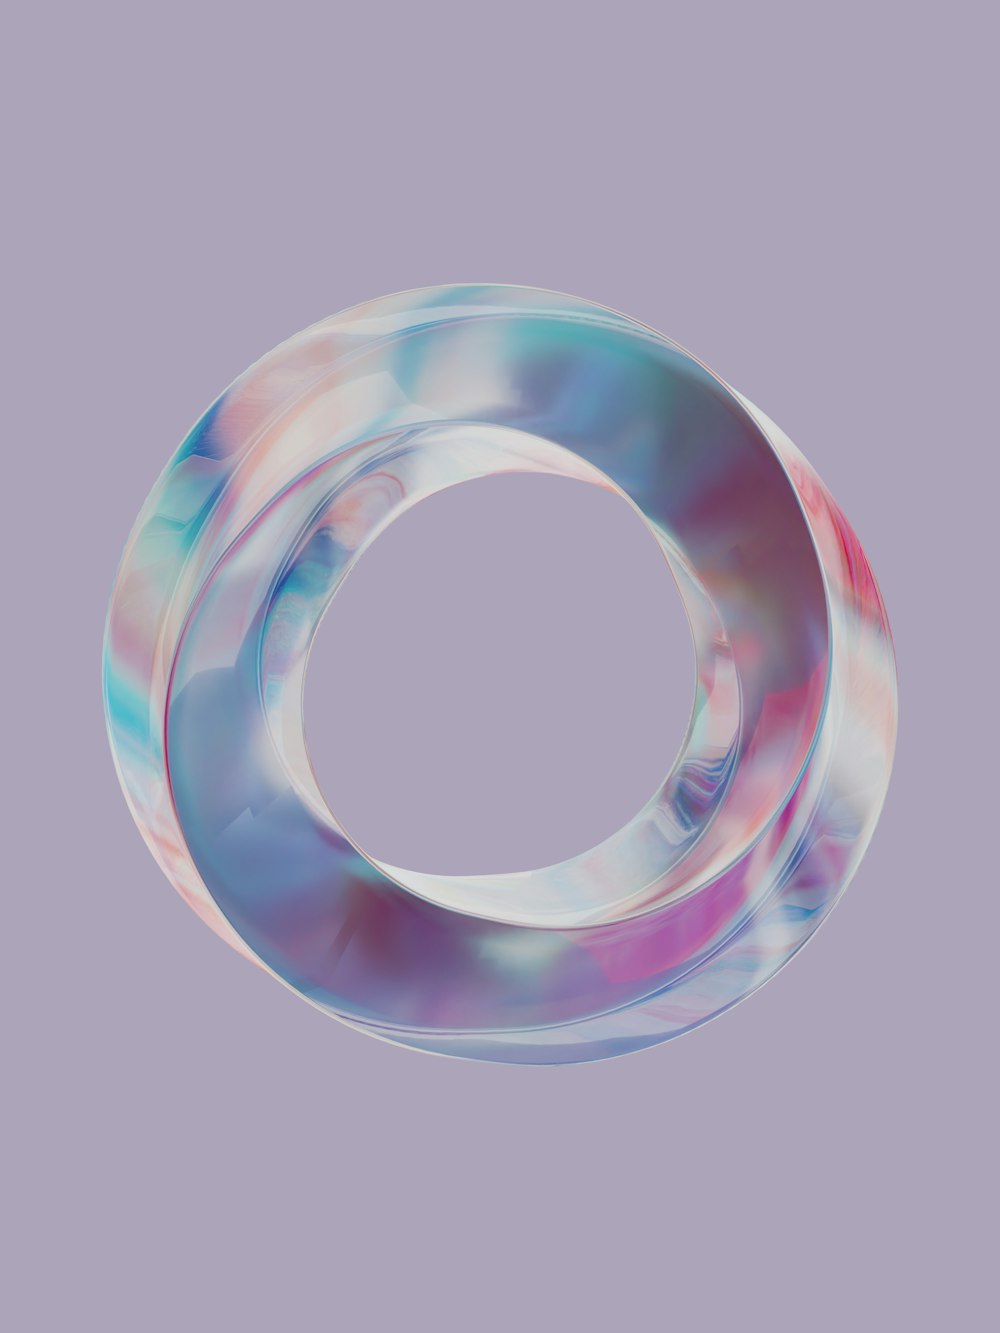 a circular object with a blue and pink design on it